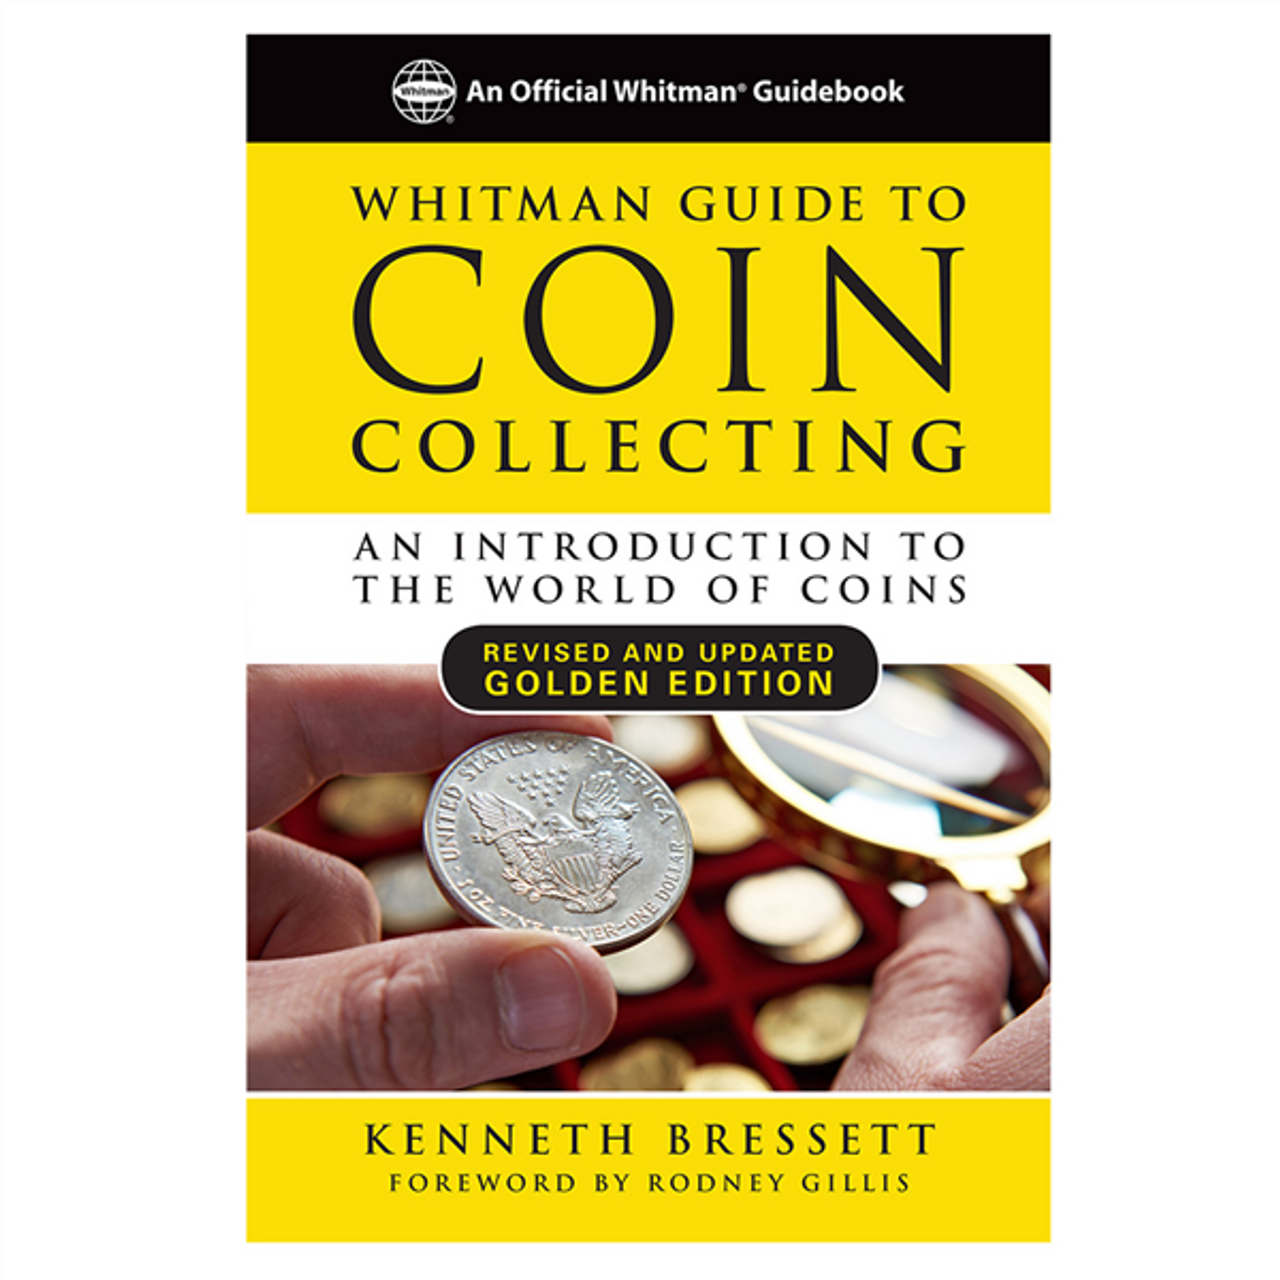 The Big Book Of Coin Collecting For Beginners: The Complete Up-To-Date  Crash Course To Start Your Own Coin Collection, Learn To Identify, Value  And Pr (Paperback)